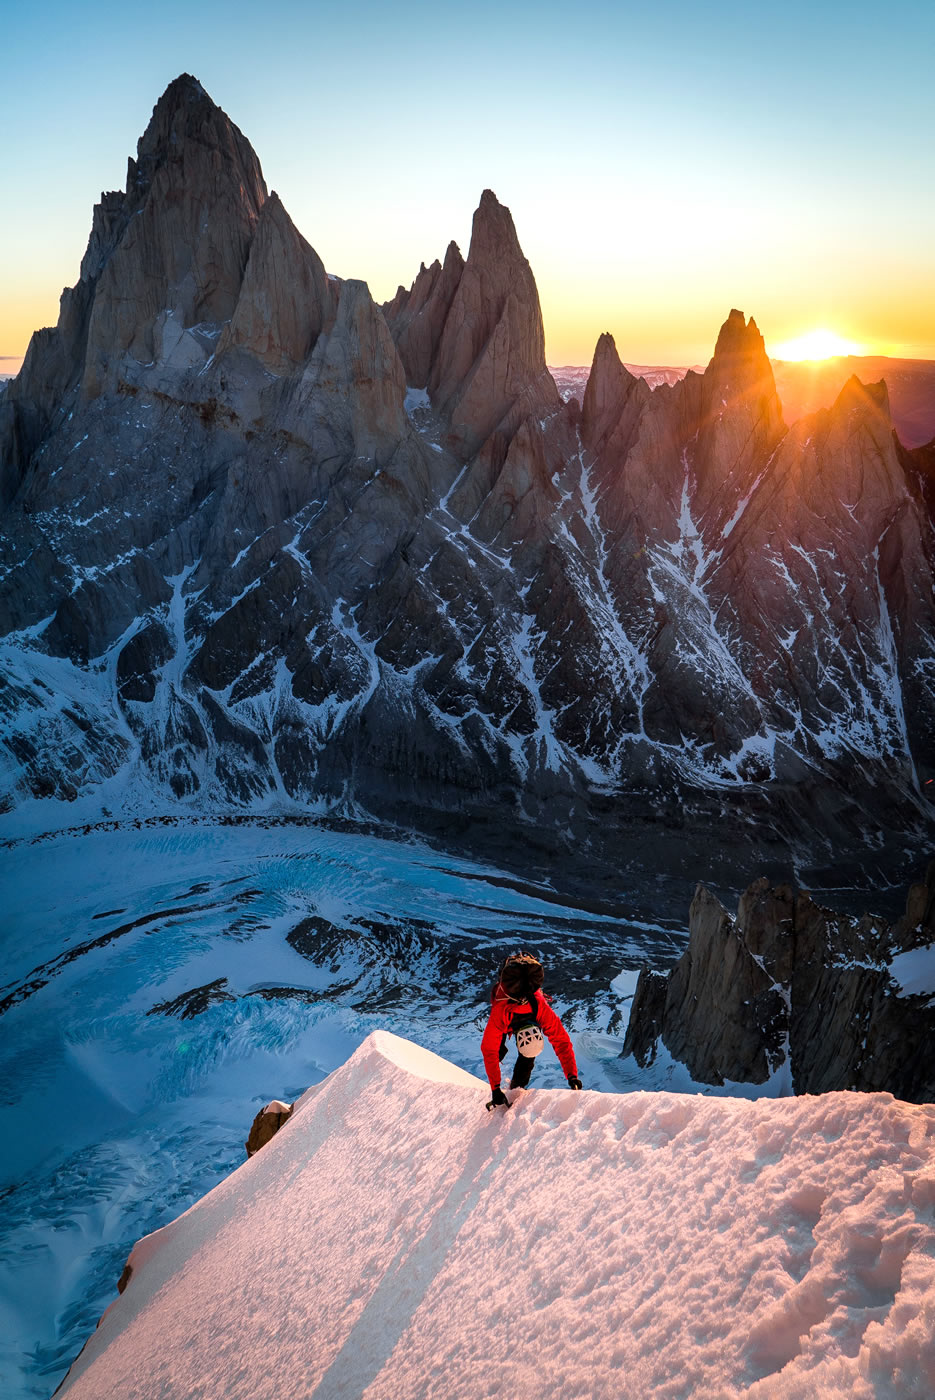 Leclerc climbs up the snowfield above the bivy site at sunrise on day two. [Photo] Austin Siadak